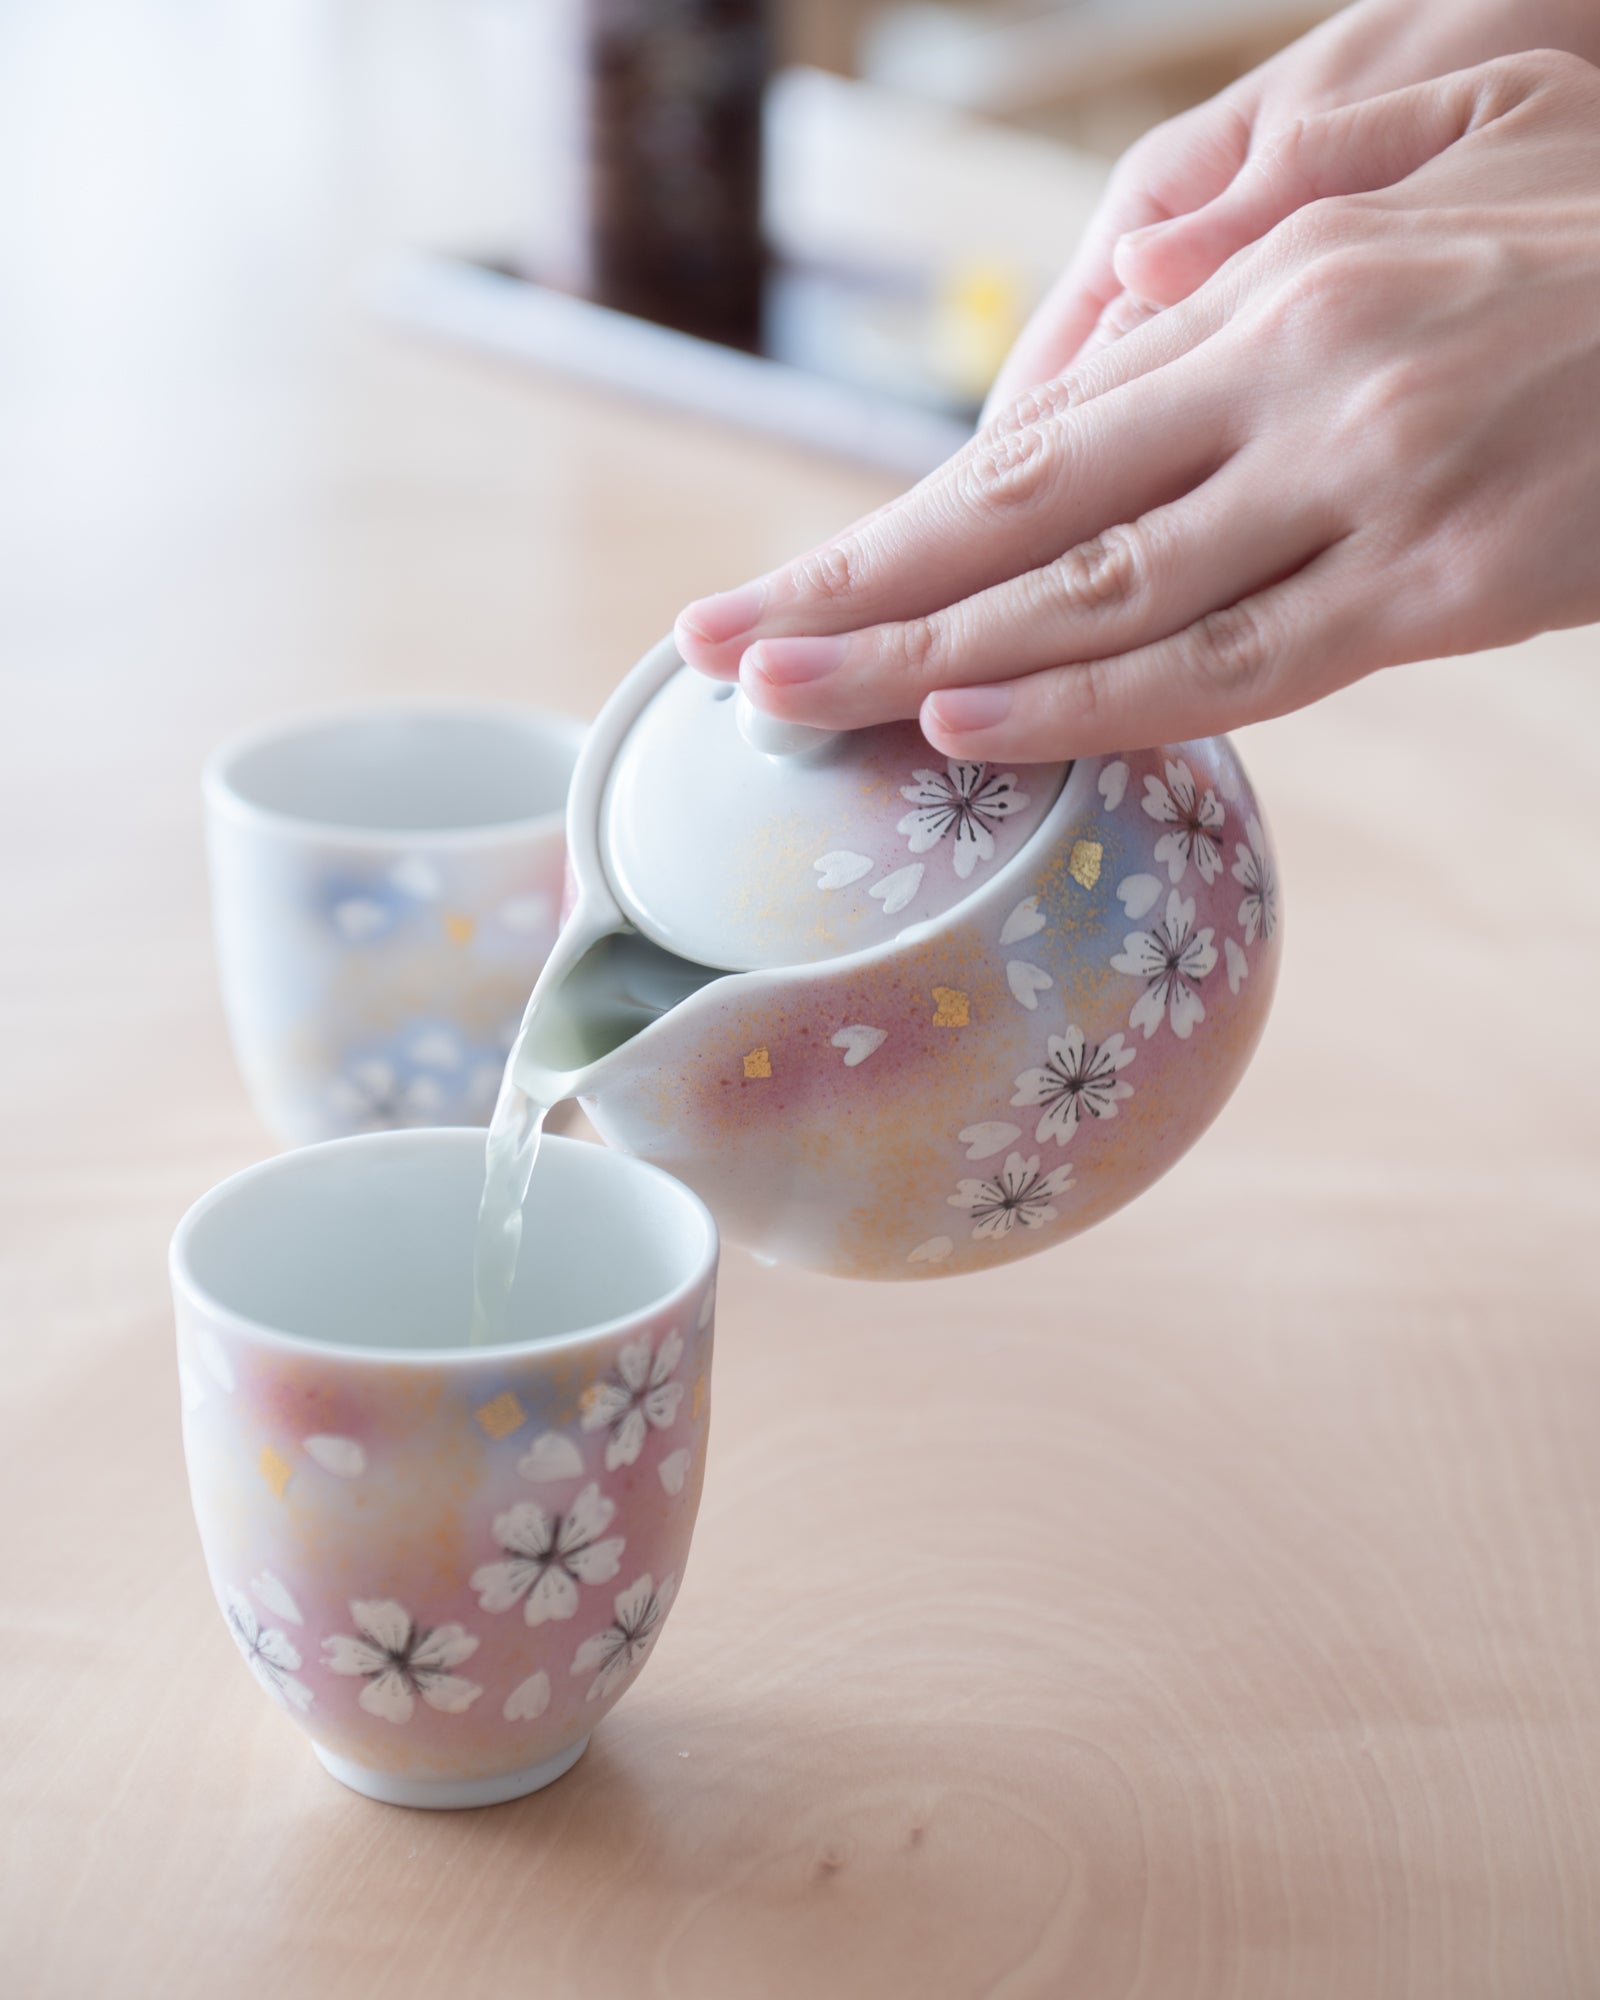 Memorable Japanese Gifts: For Your Colleagues and Business Relations, MUSUBI KILN